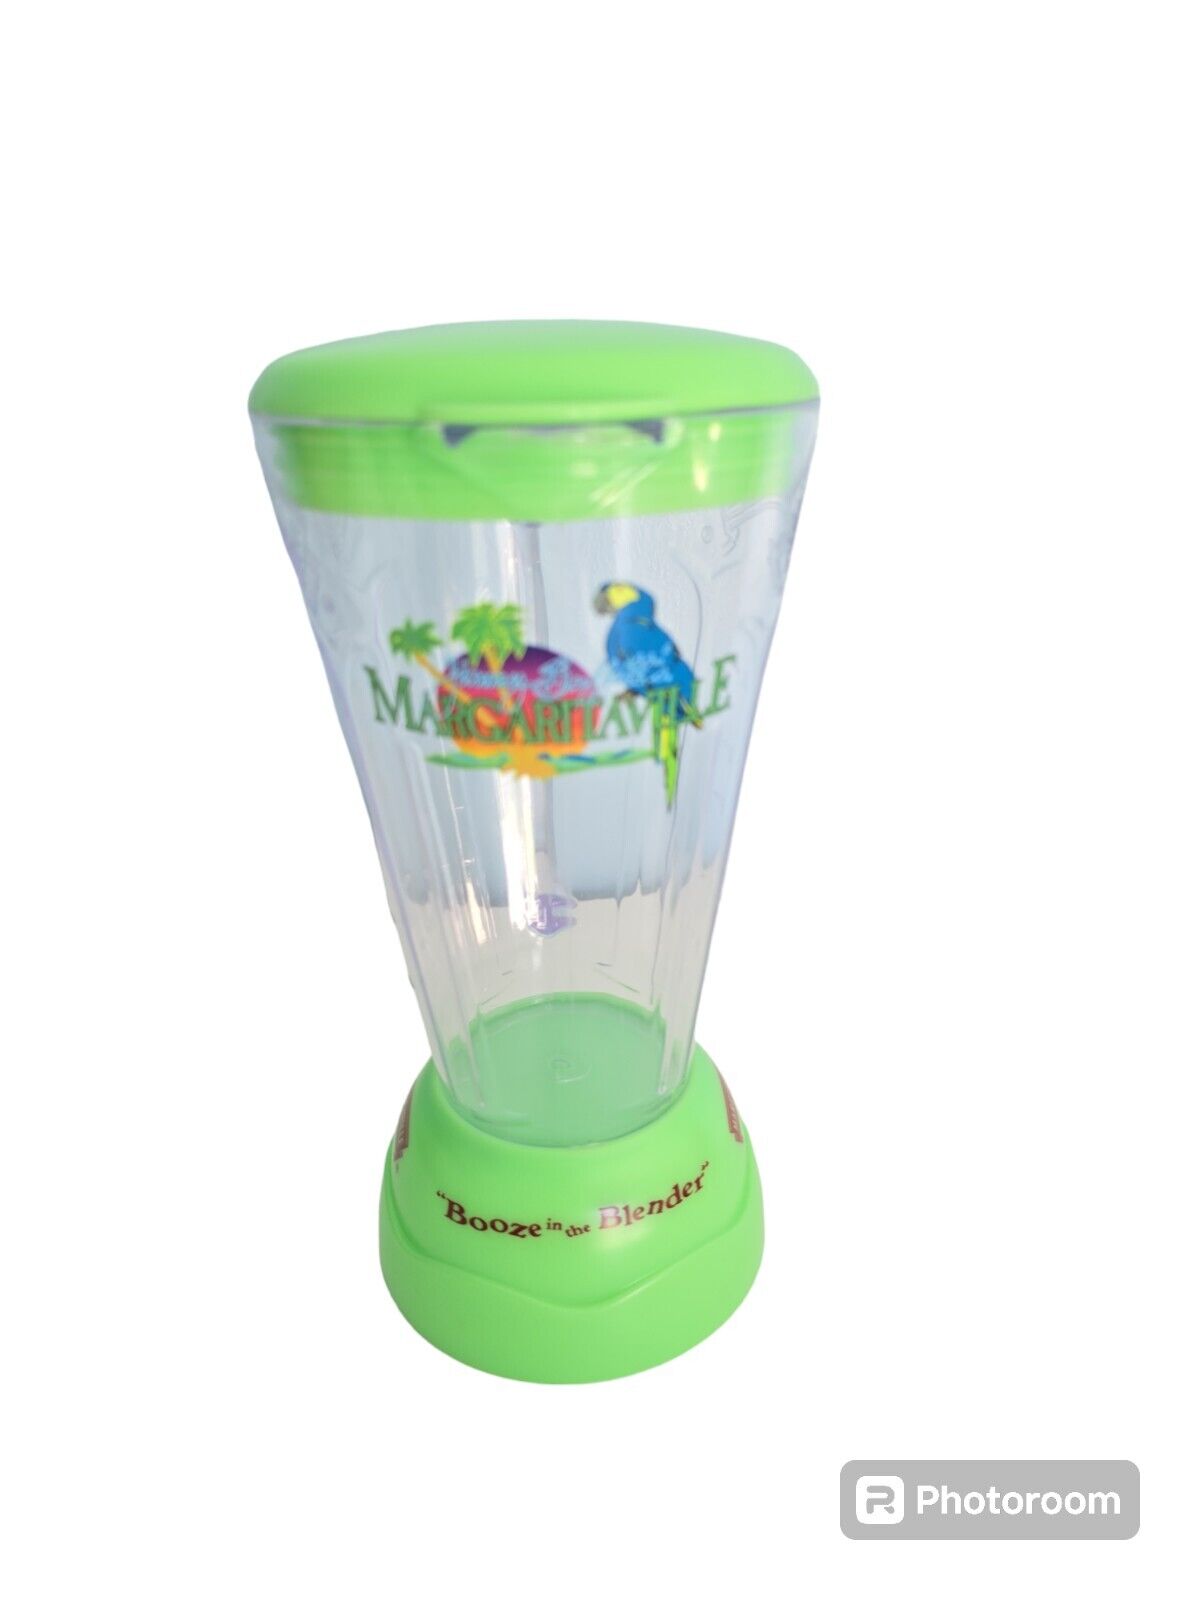 Margaritaville Jimmy Buffet Booze In the Blender Plastic Cup with Lid No Straw